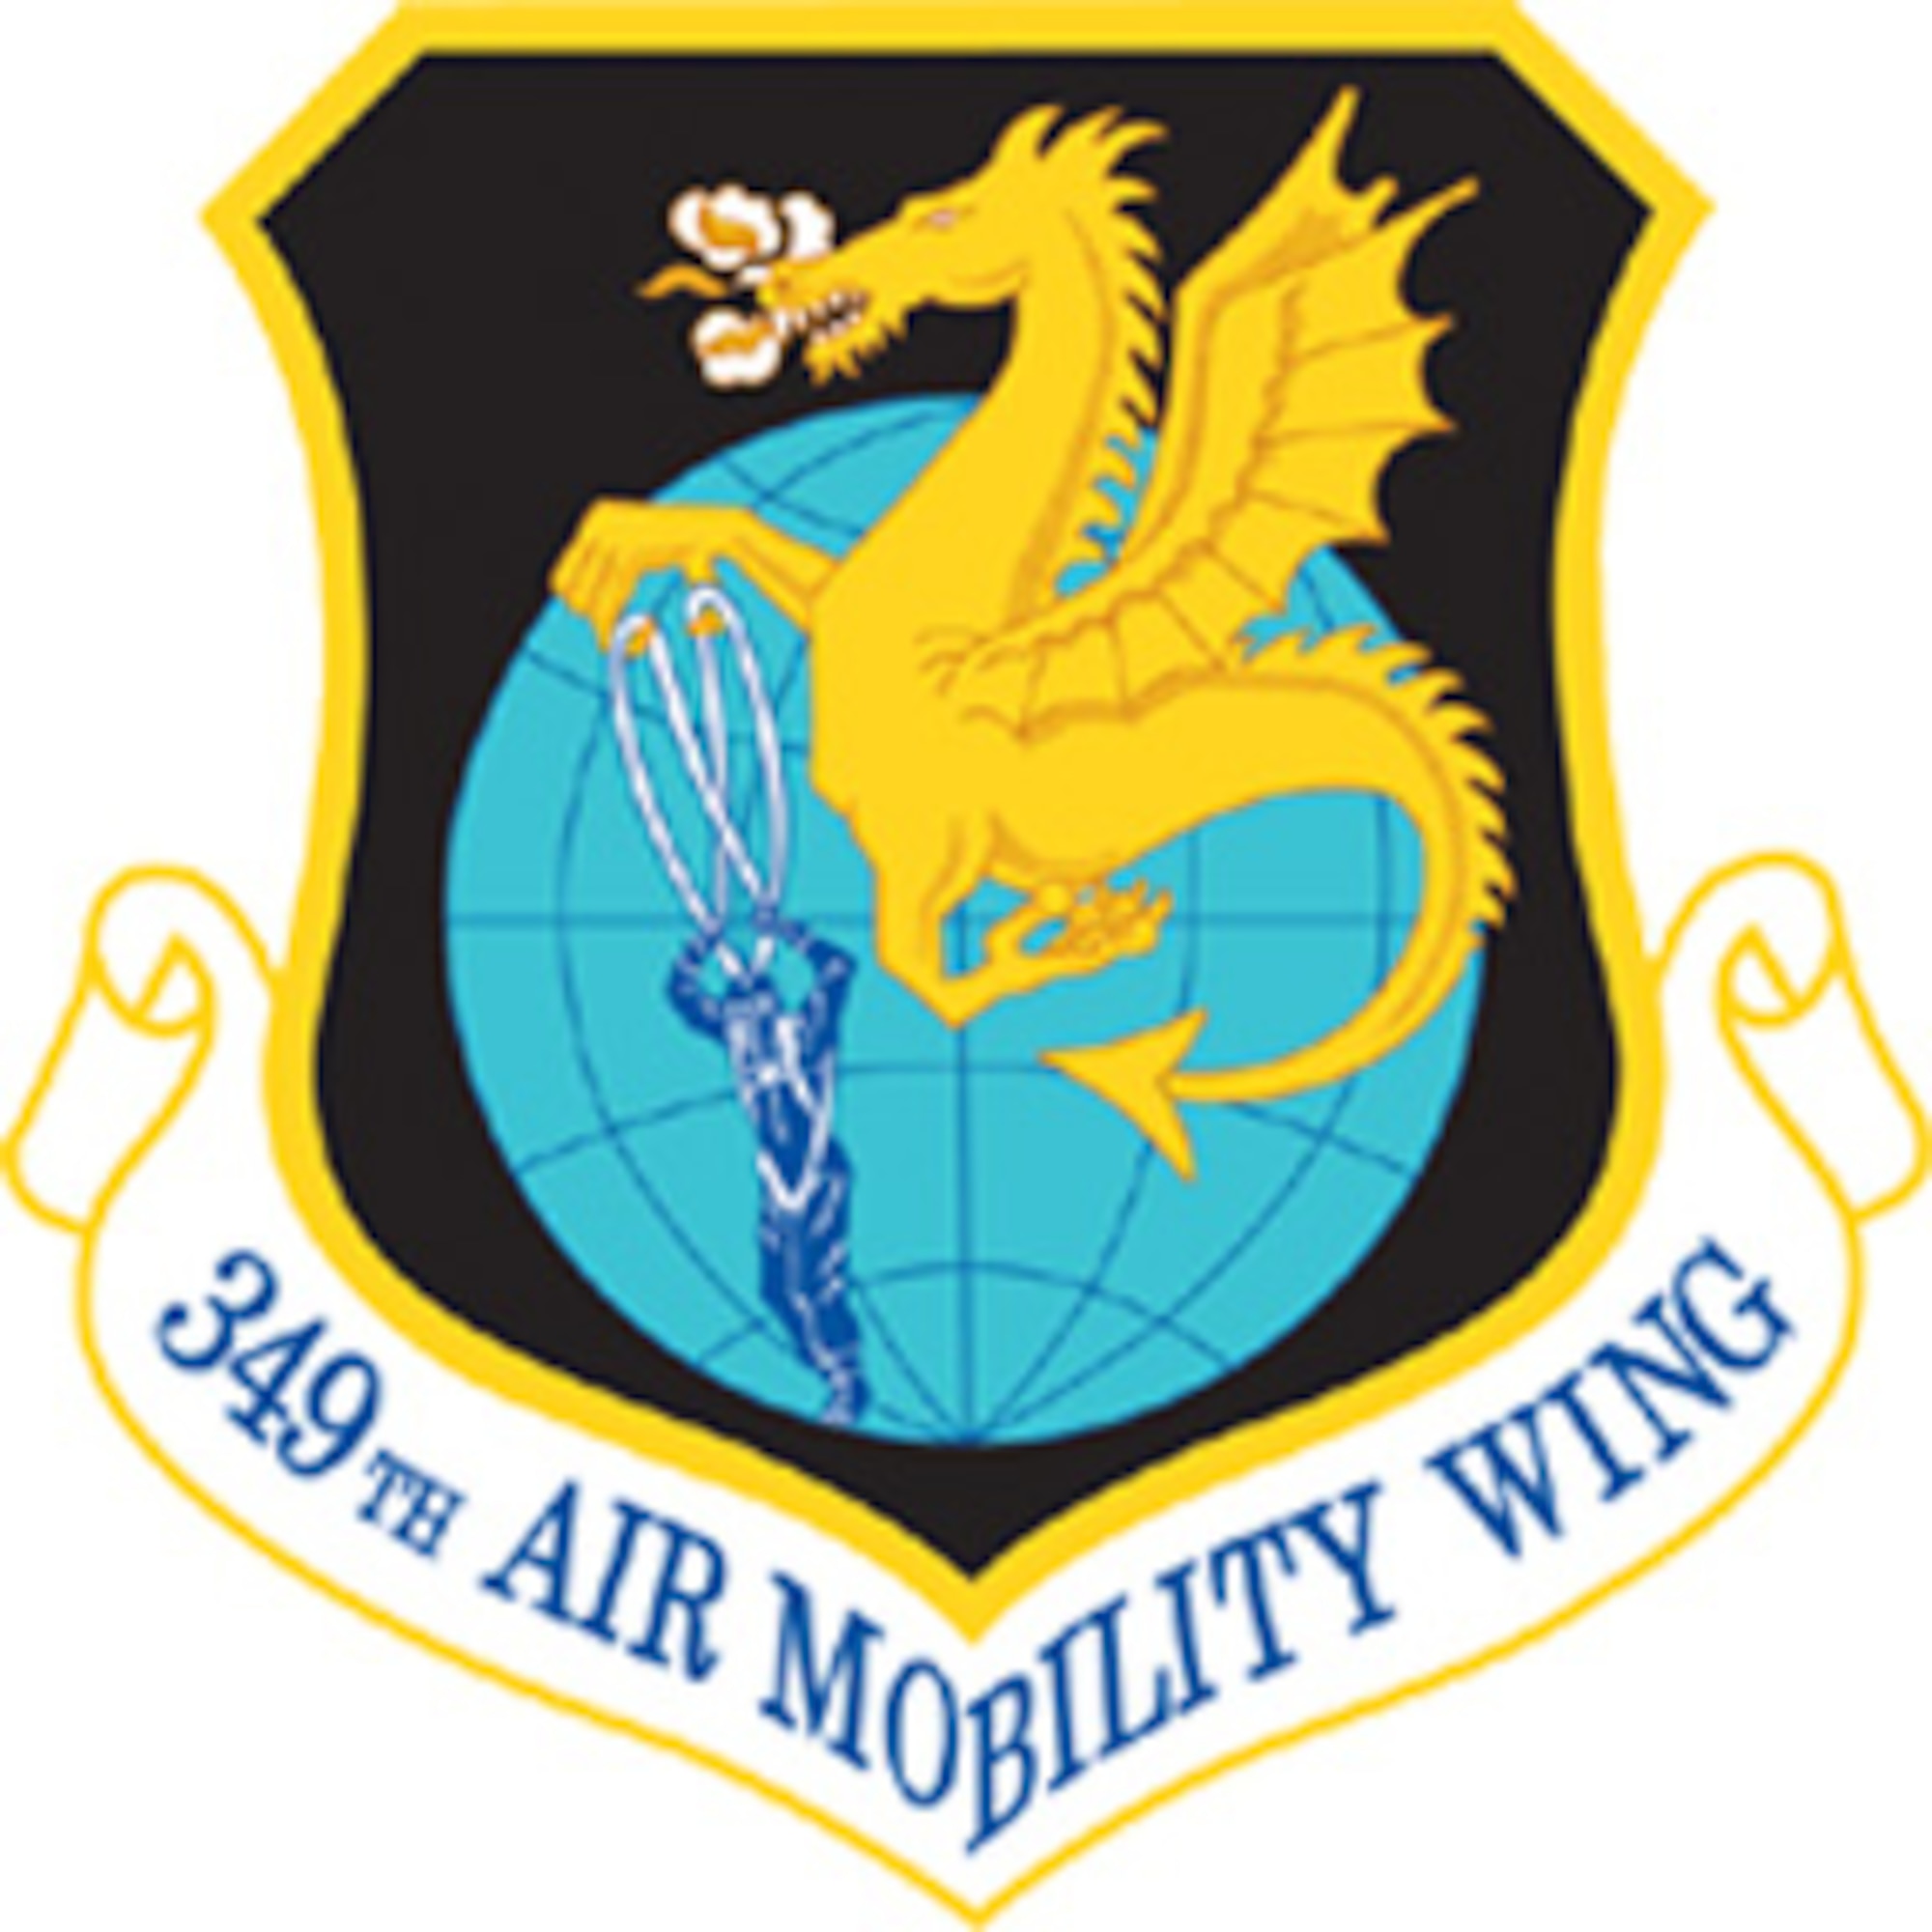 349th Air Mobility Wing patch